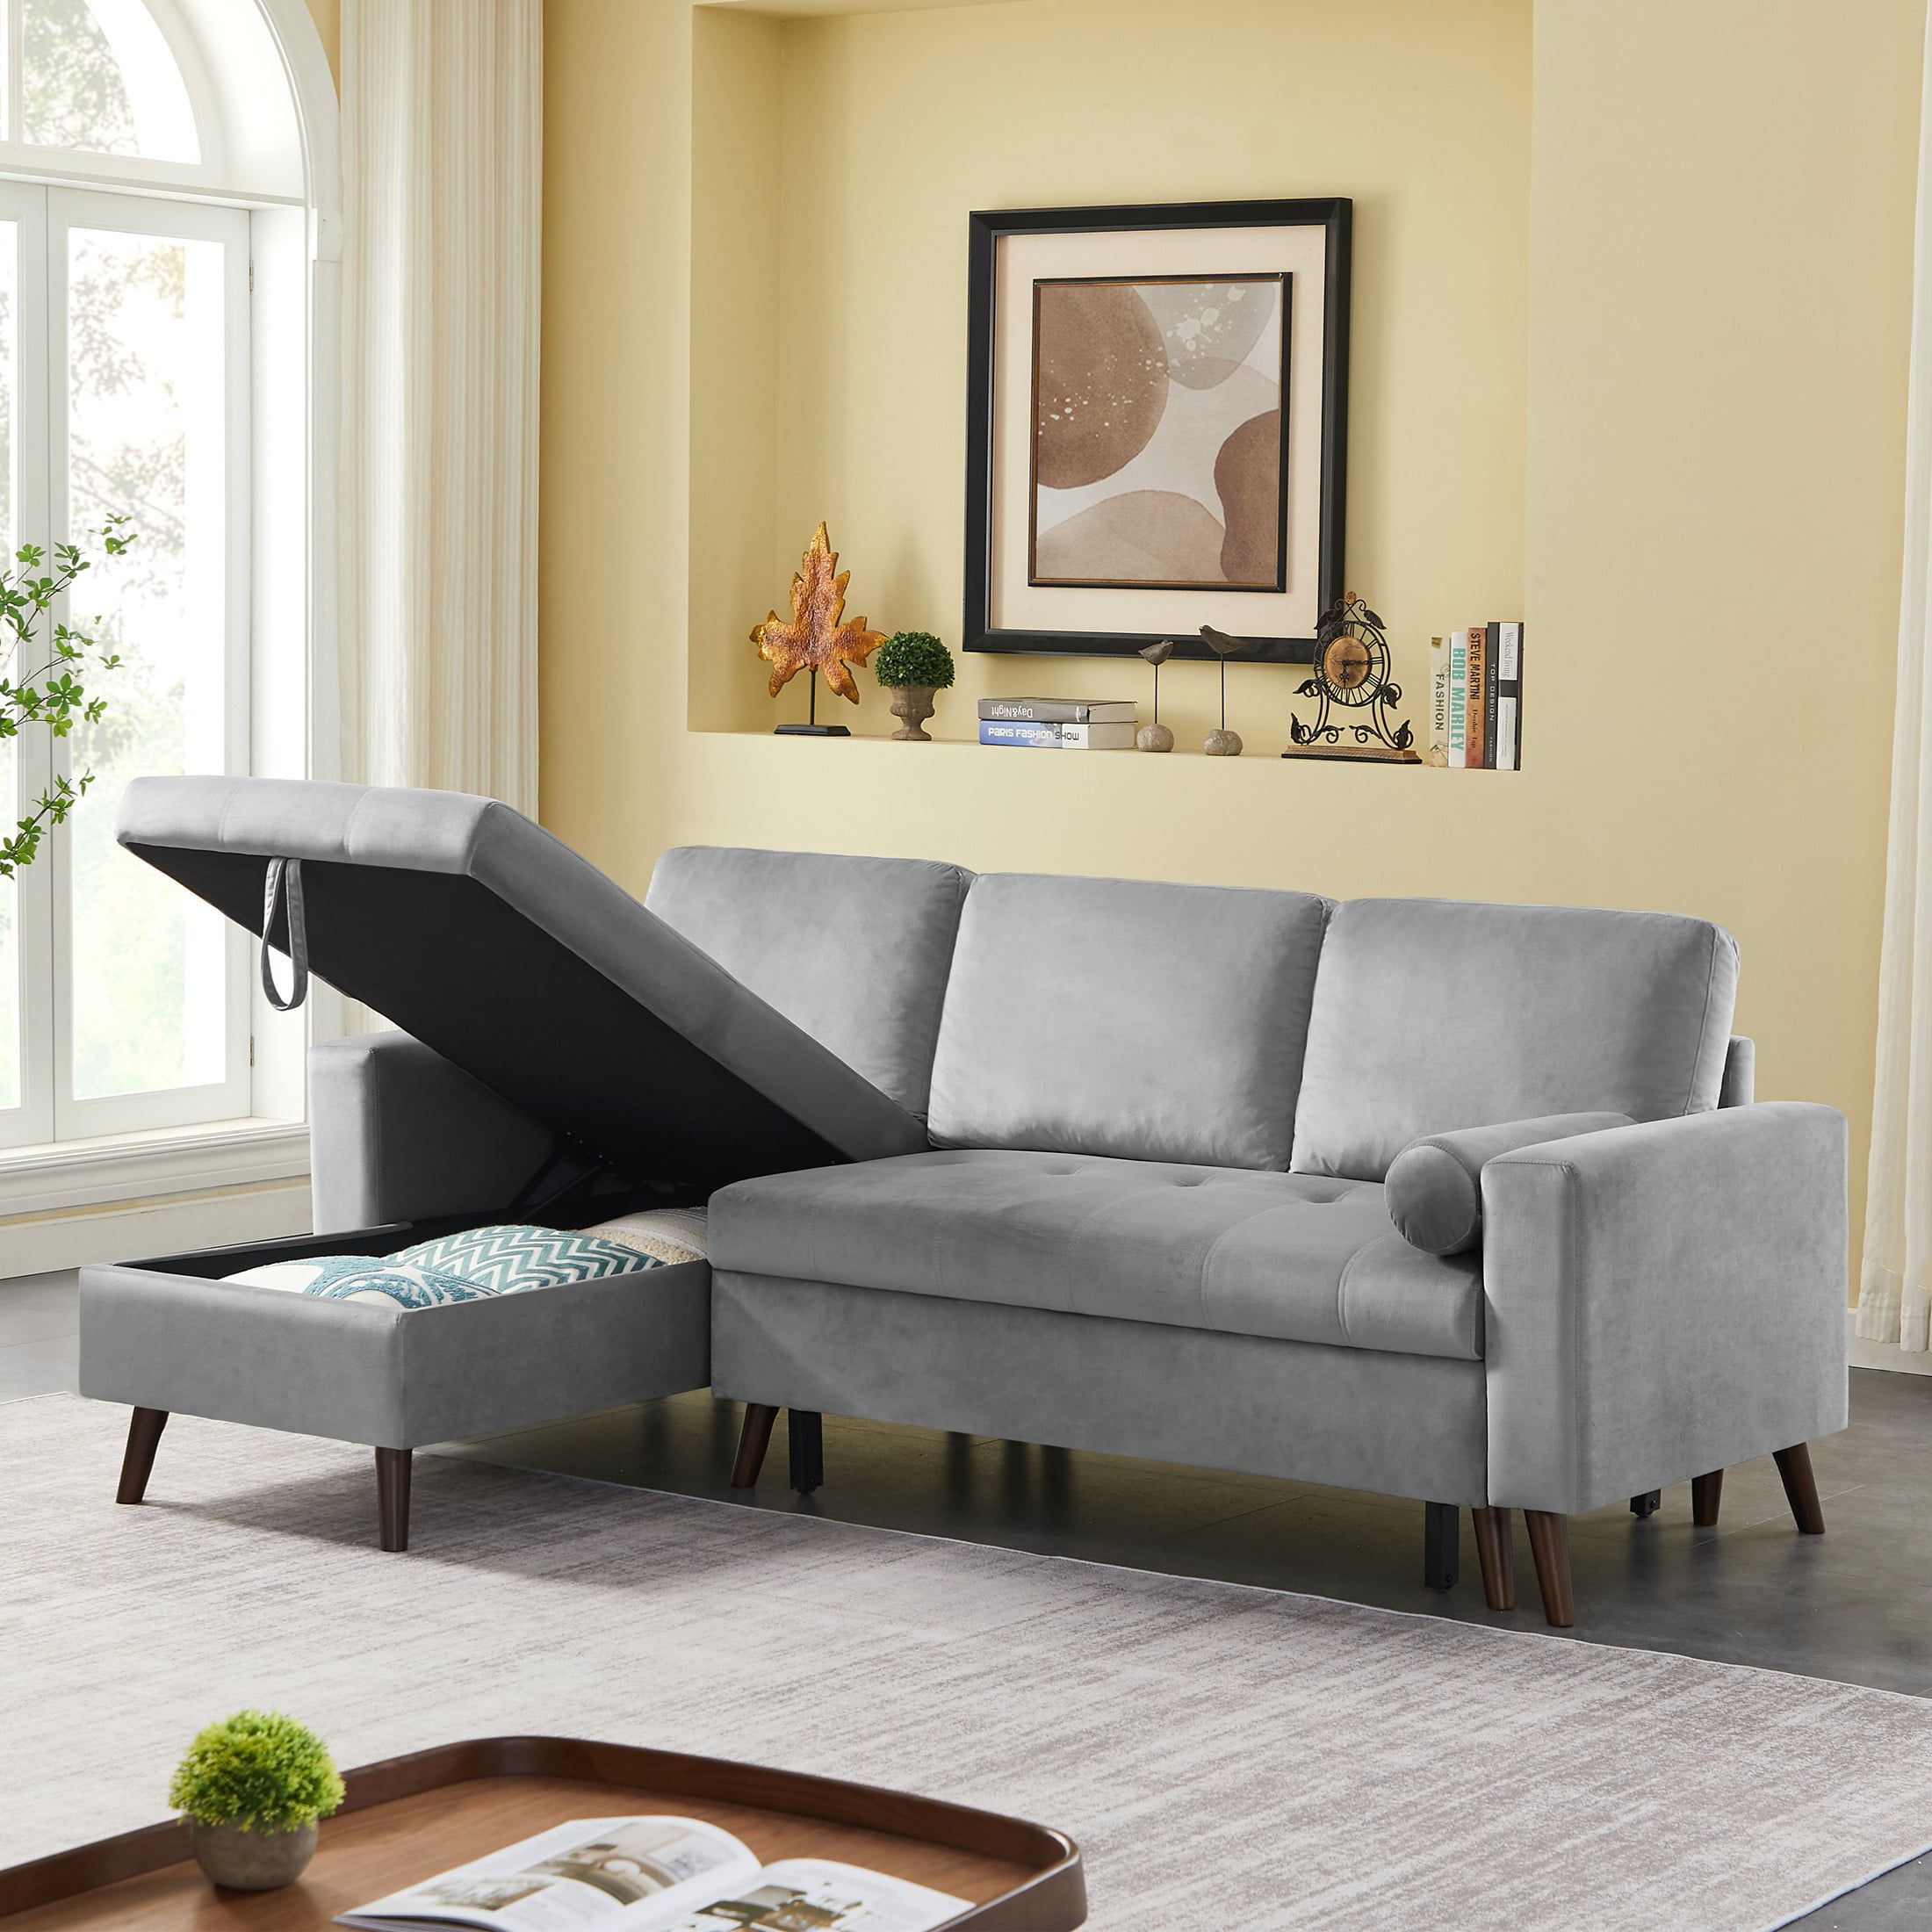 Aukfa 88" Sectional Sleeper Sofa  Pull Out Bed With Storage Chaise For  Living Room  Velvet  Gray – Walmart Intended For Convertible Sofa With Matching Chaise (Gallery 9 of 20)